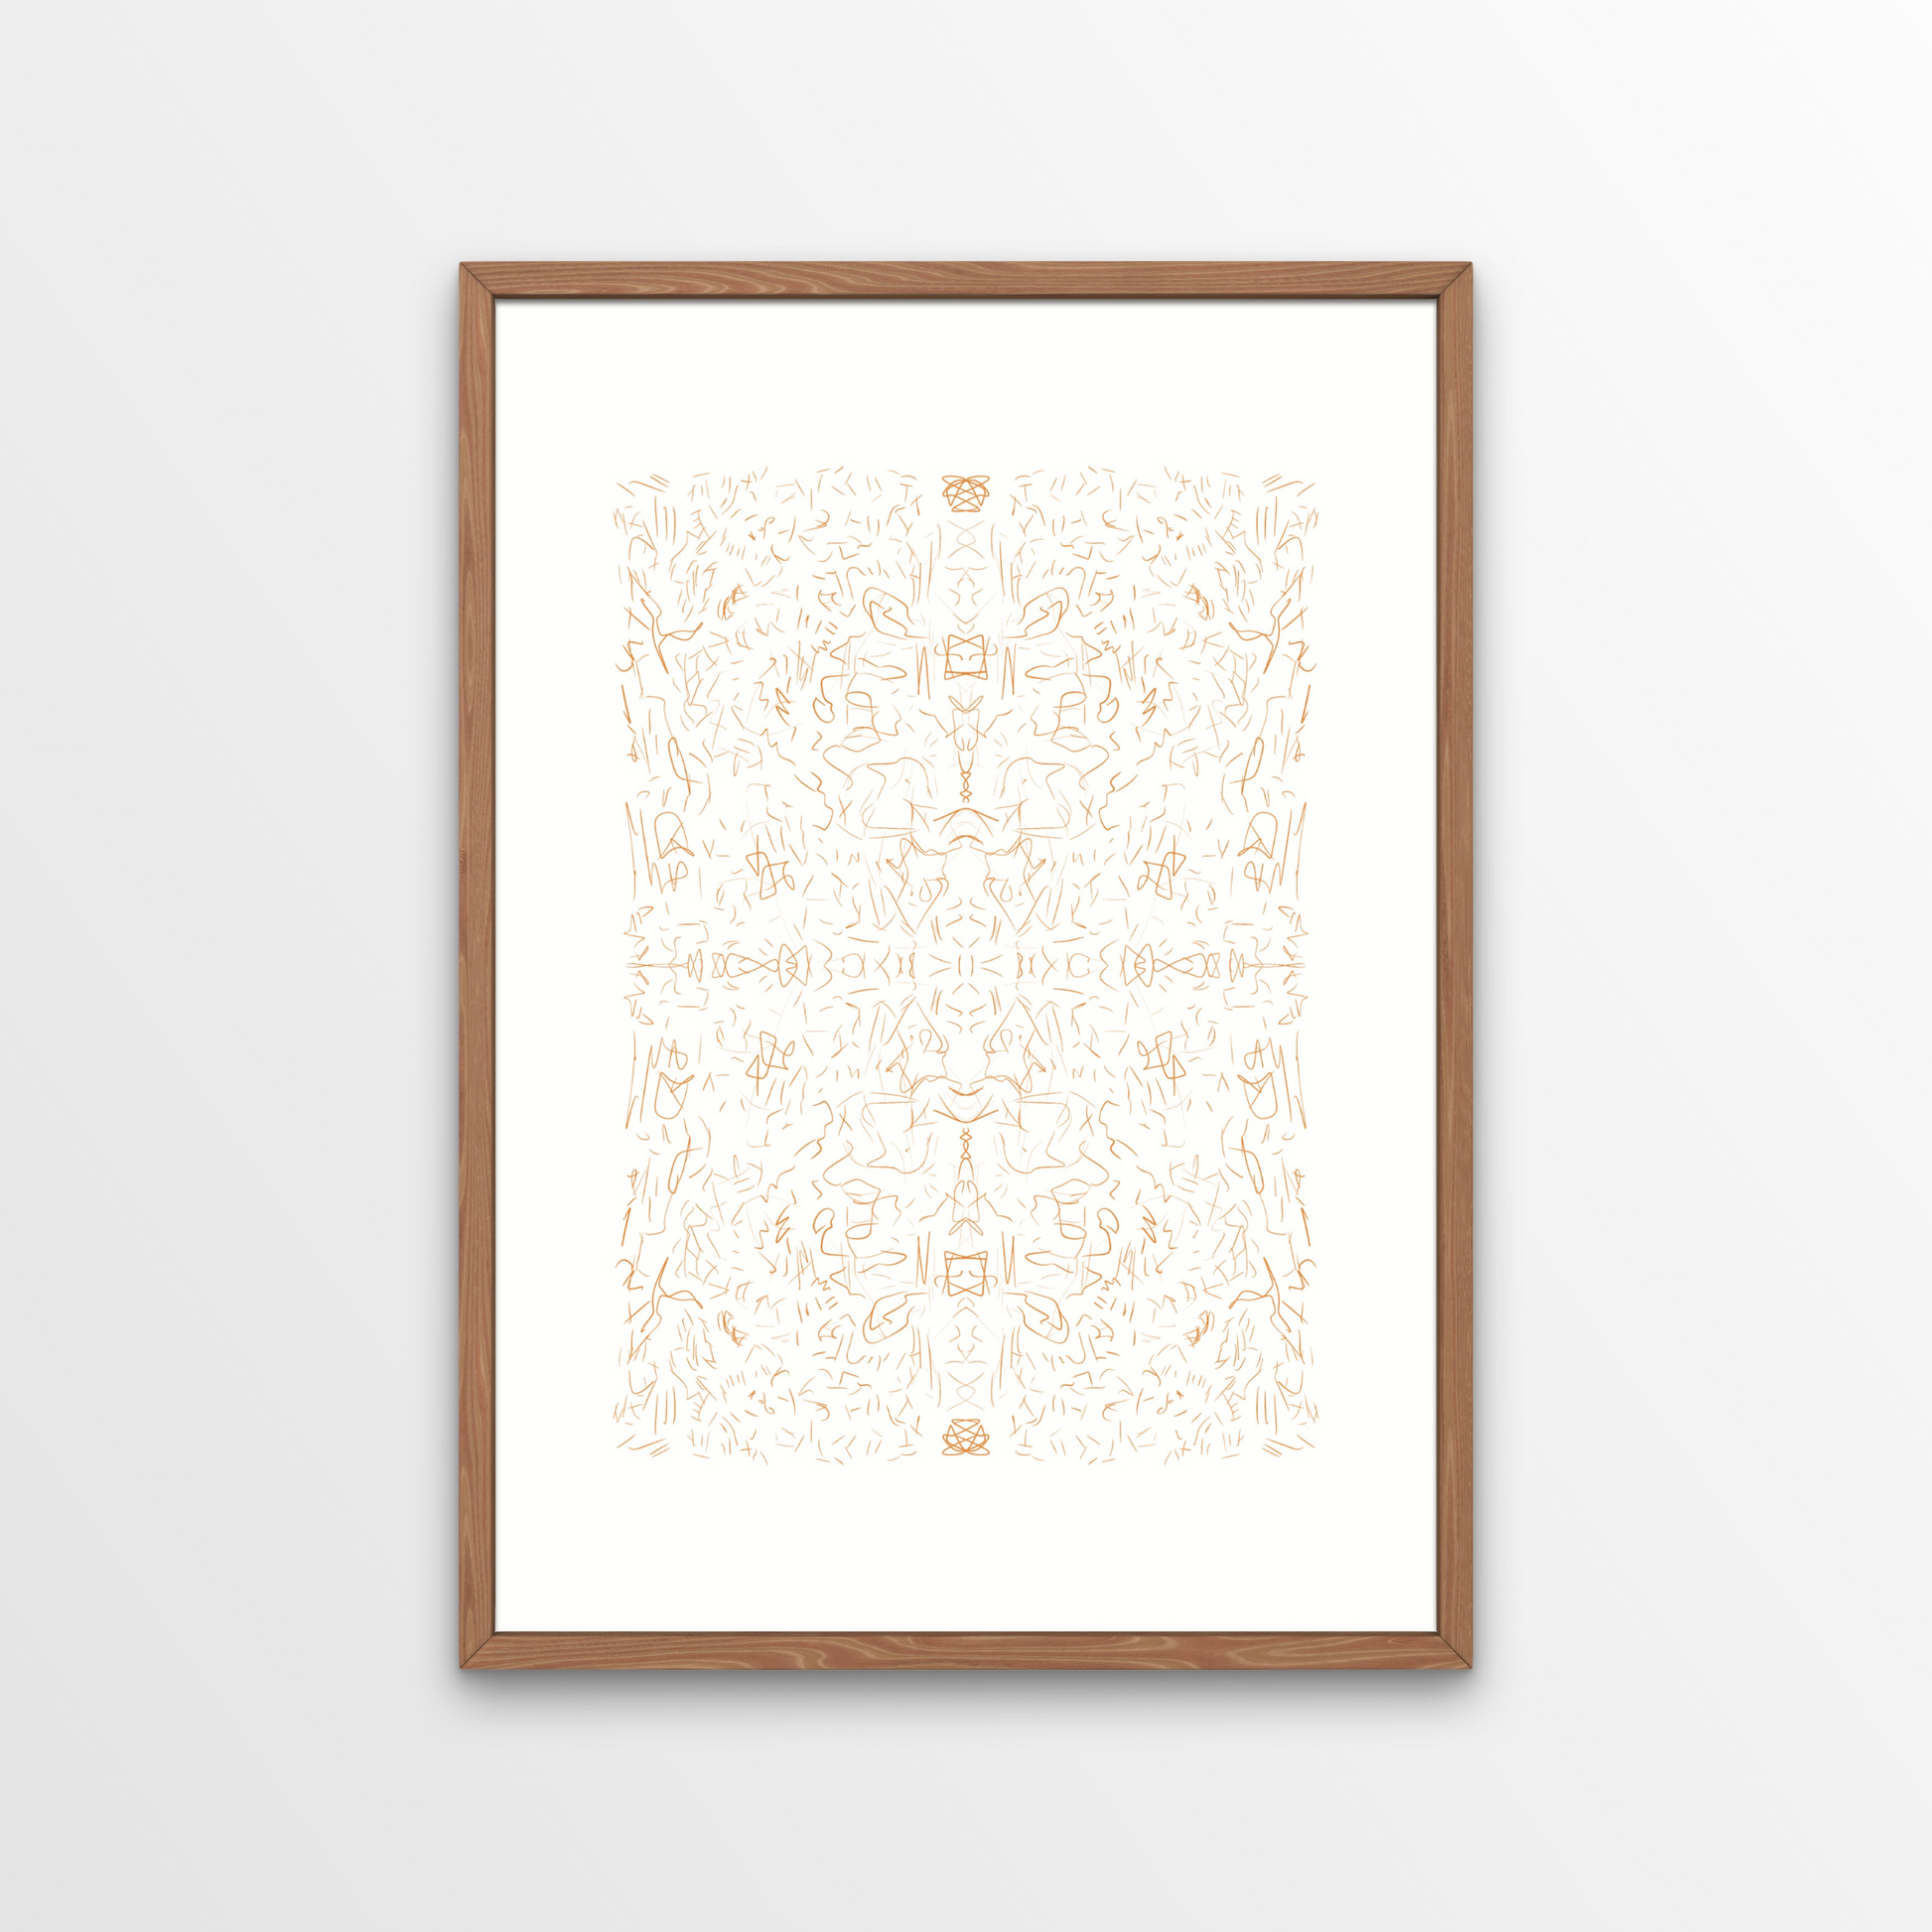 Looking for something different to add to your walls? Check out our Minimalist Kaleidoscope Fine Line Art Print! This print is full of boho vibes and would make a great addition to any room.